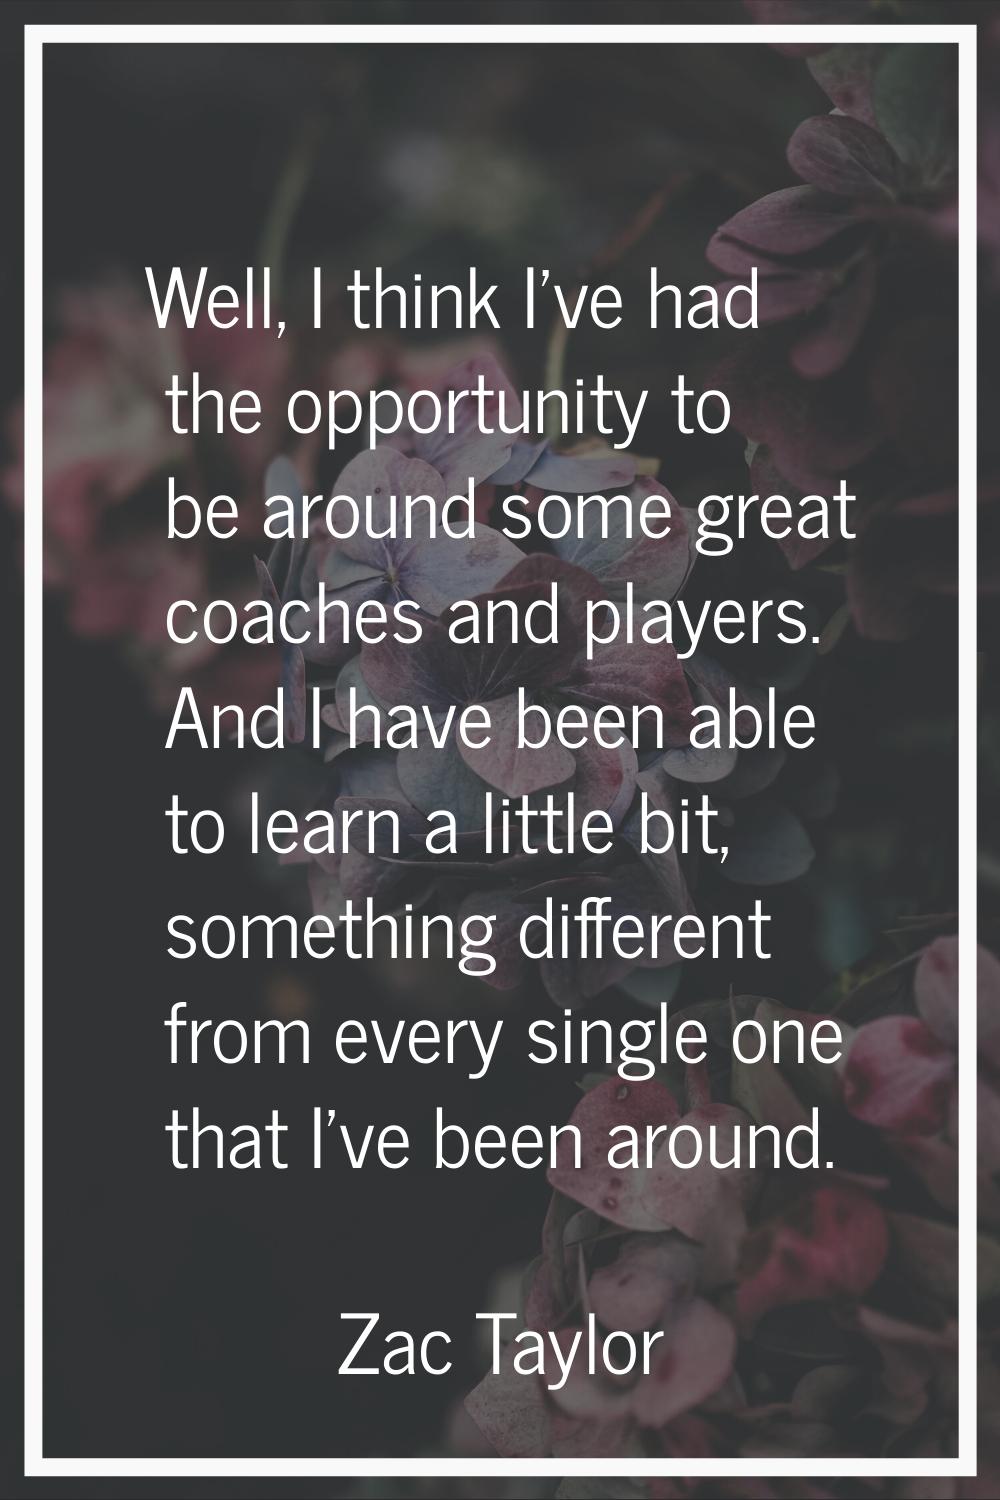 Well, I think I've had the opportunity to be around some great coaches and players. And I have been